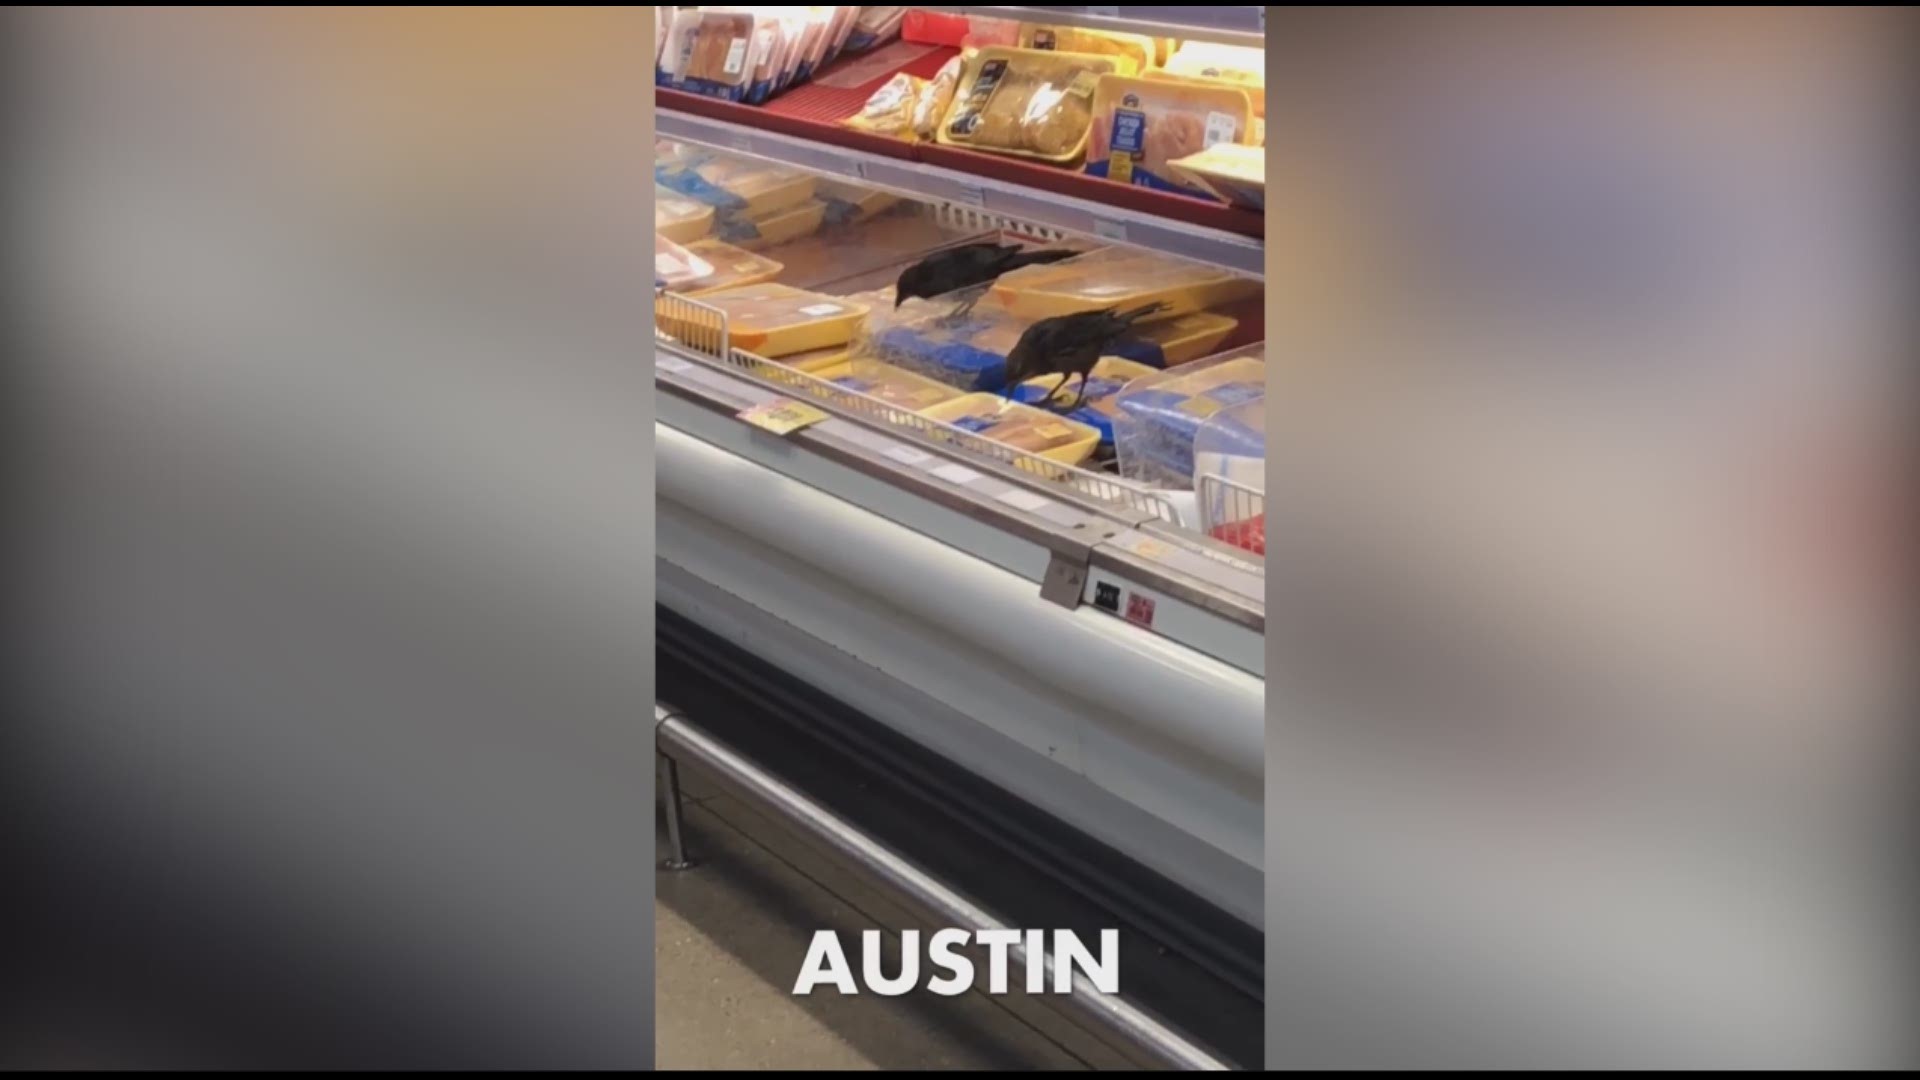 A pair of grackles were spotted at an Austin HEB on Saturday pecking at food in the meat department.